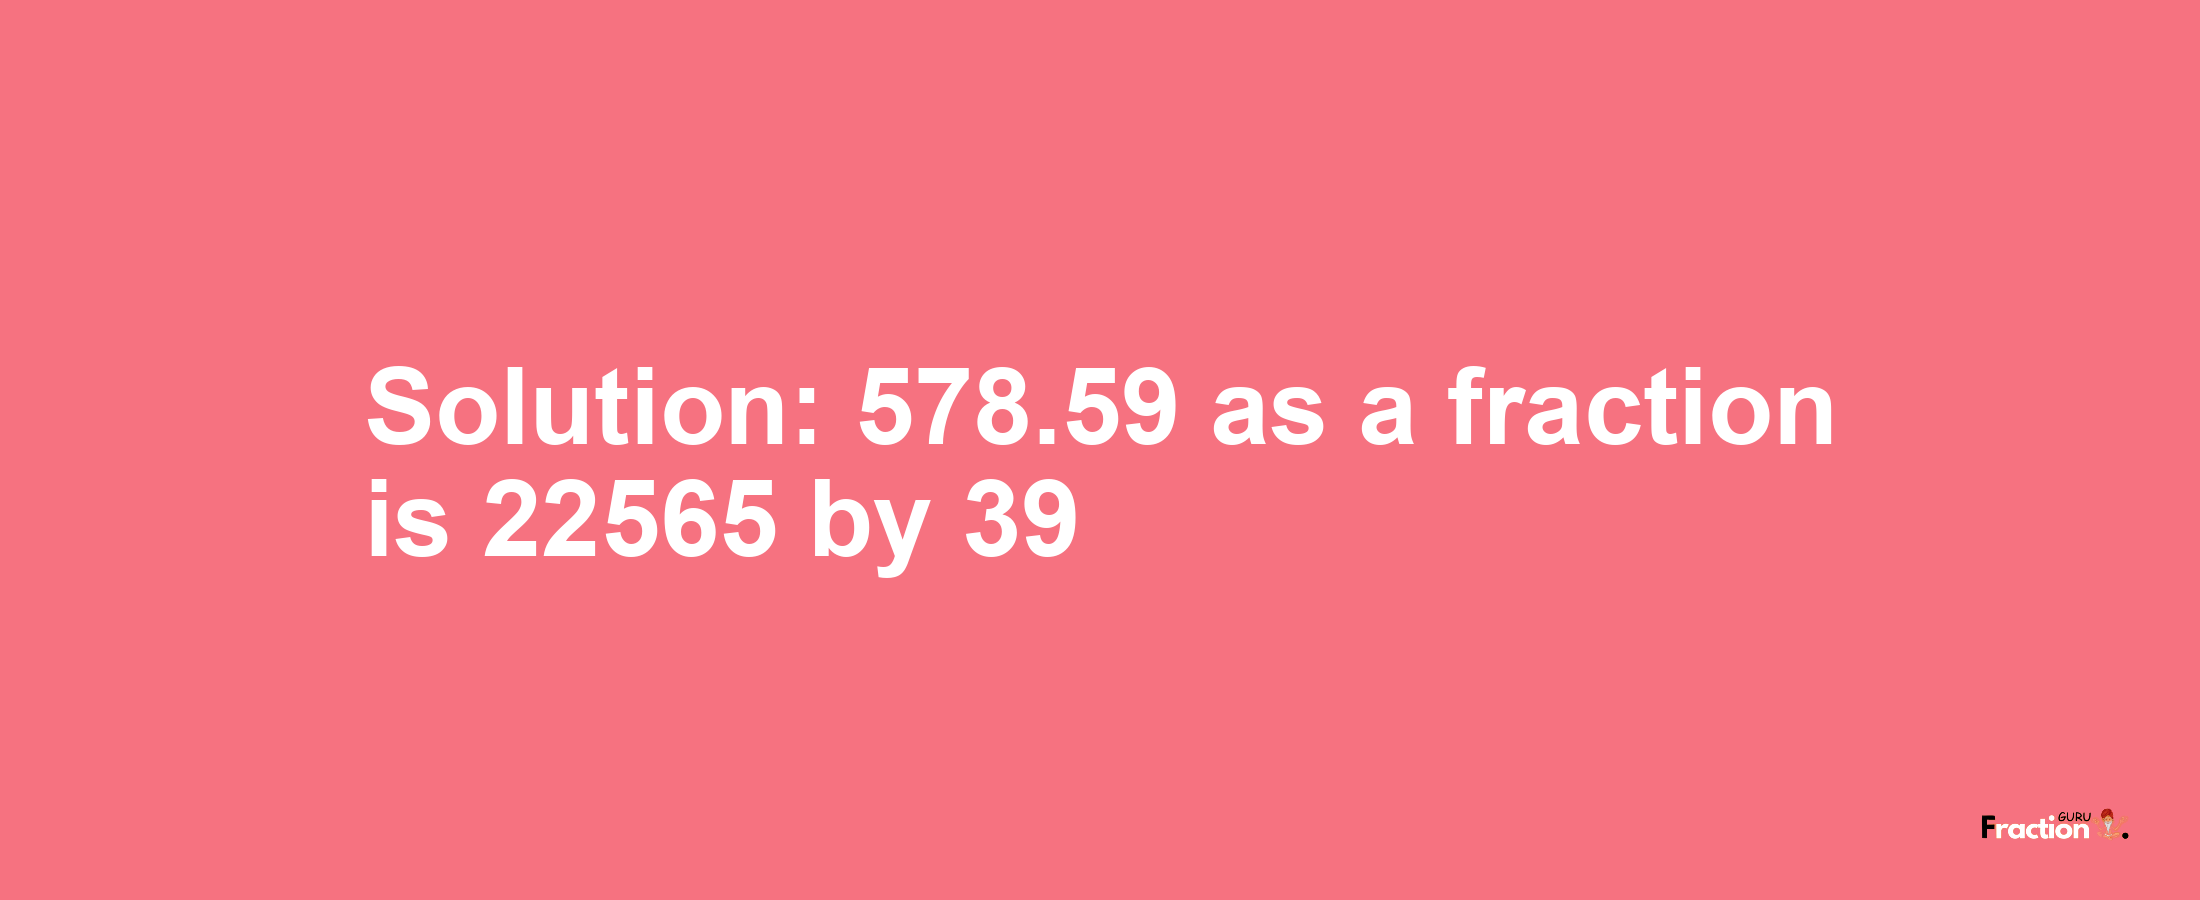 Solution:578.59 as a fraction is 22565/39